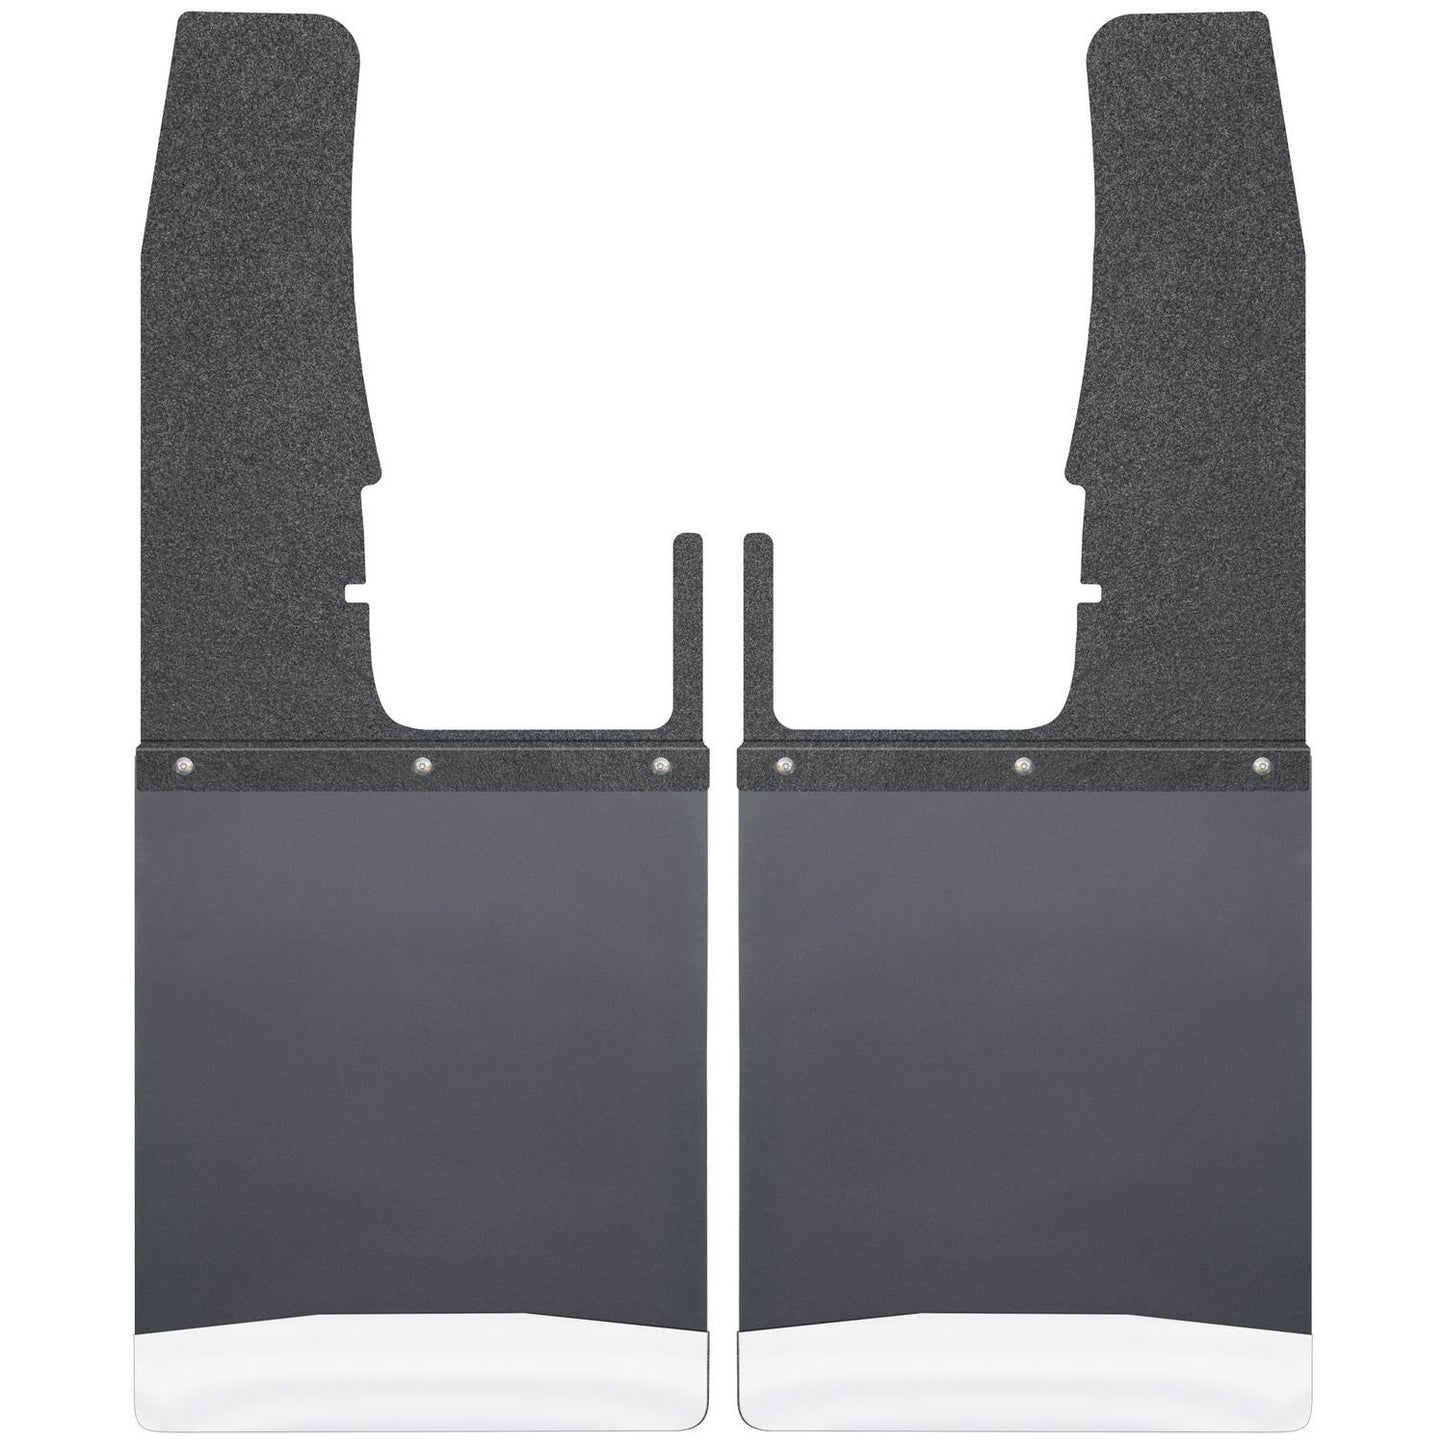 Husky Liners Kick Back Mud Flaps Front 12" Wide - Black Top and Stainless Steel Weight 17102